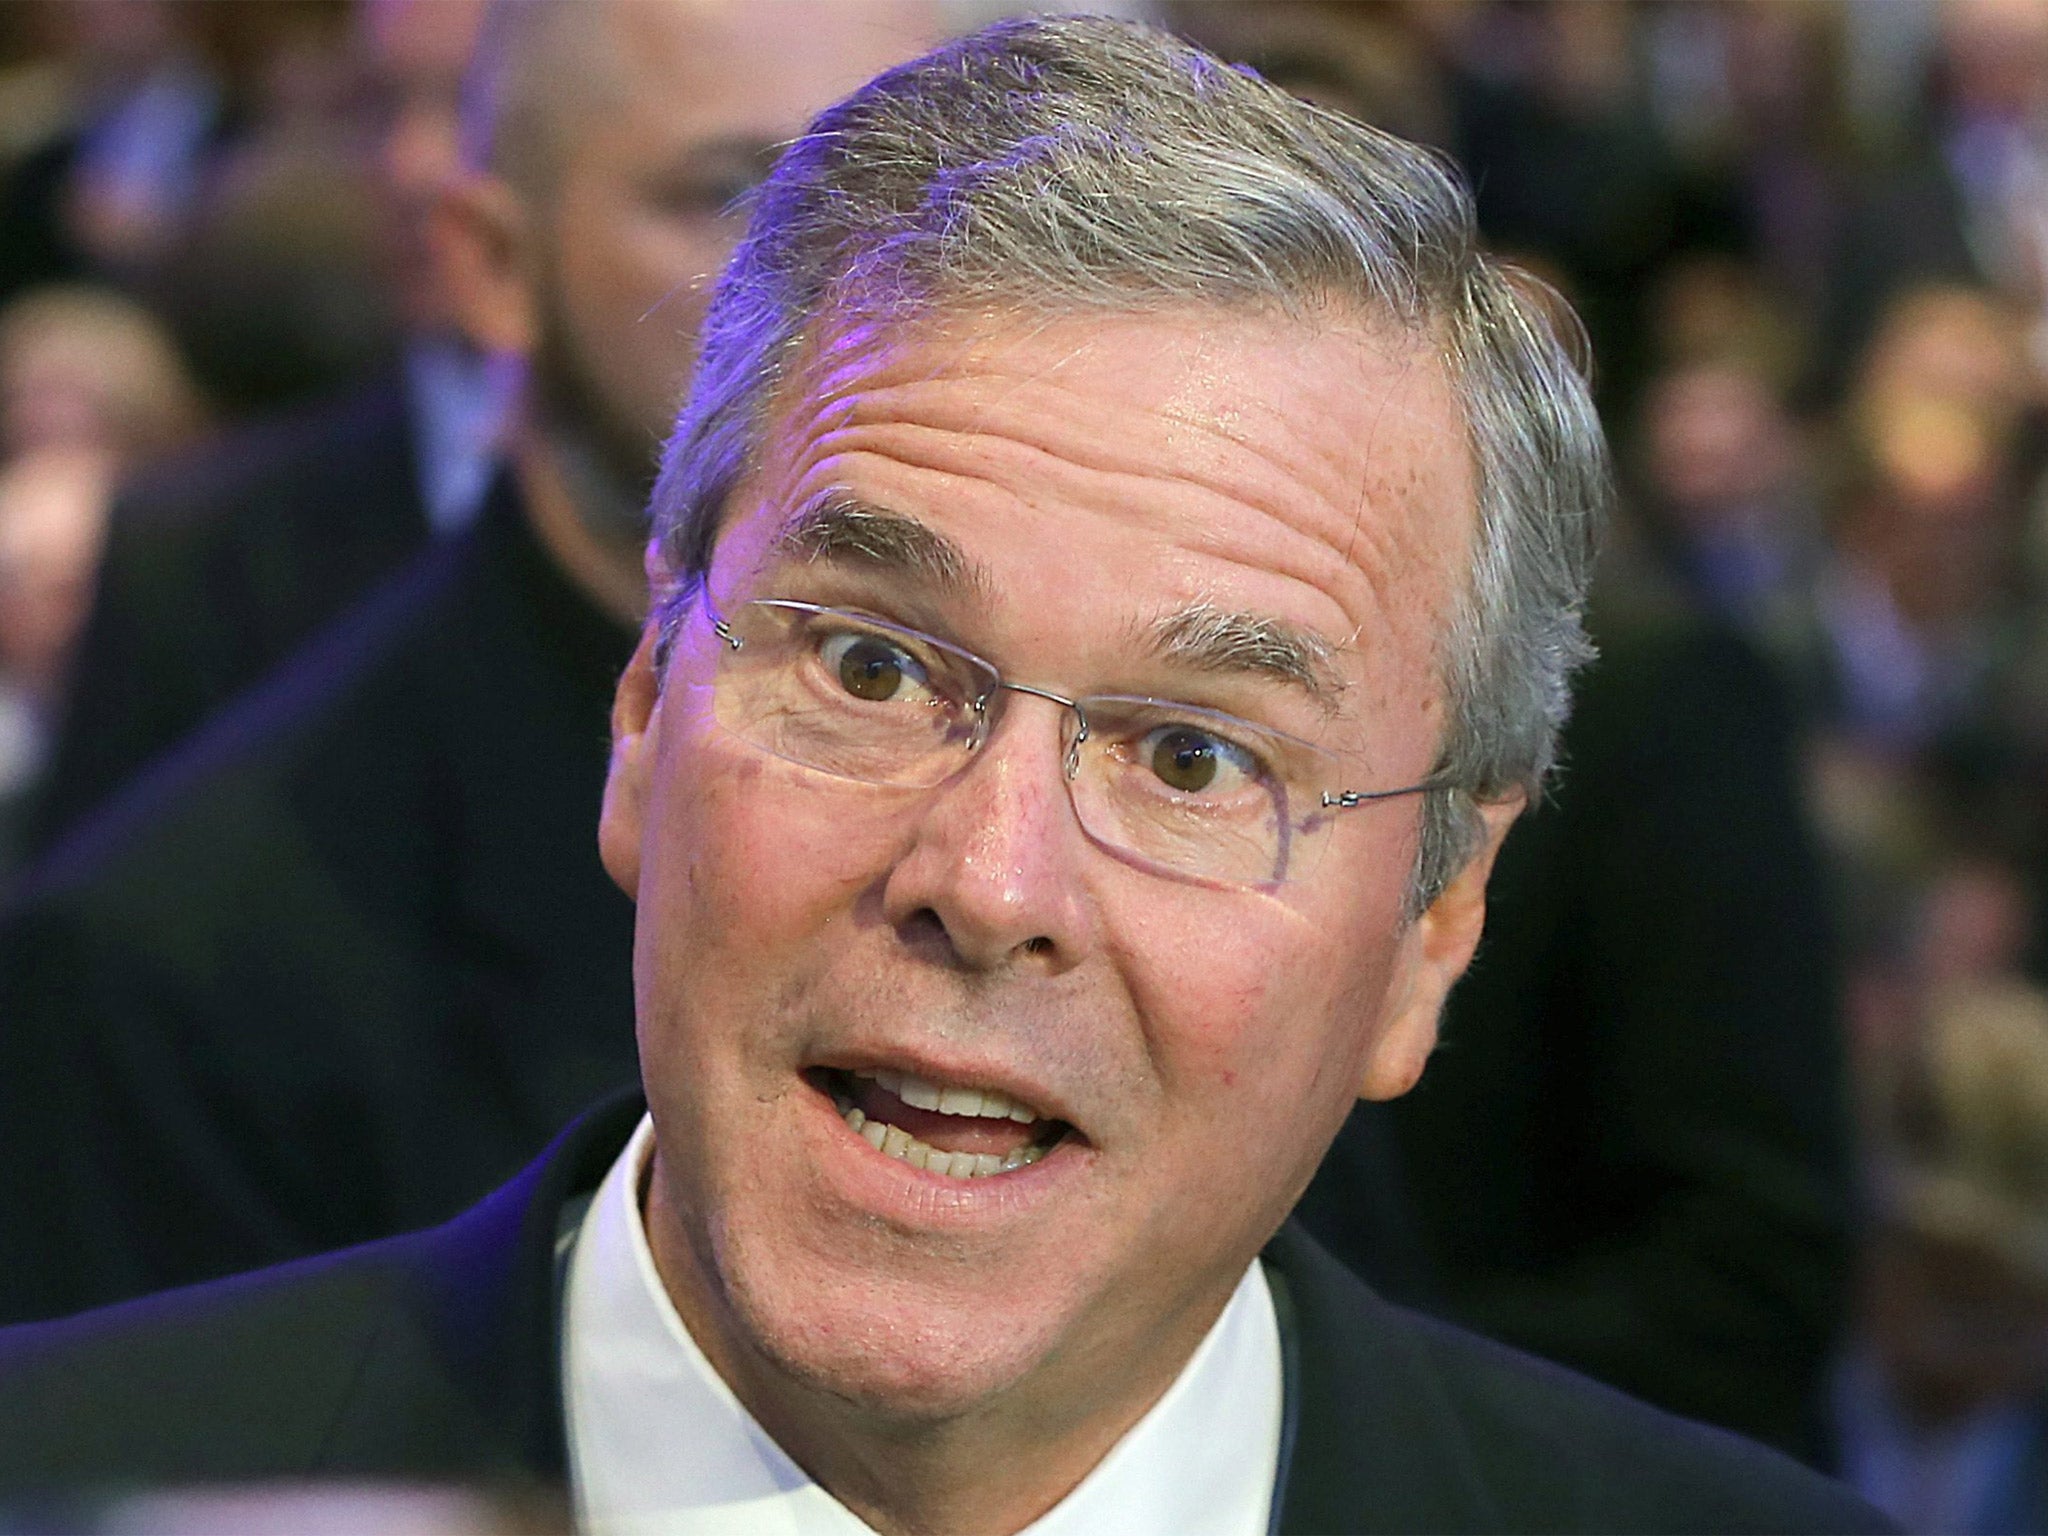 For a while Jeb Bush was the assumed front-runner for Republican candidacy